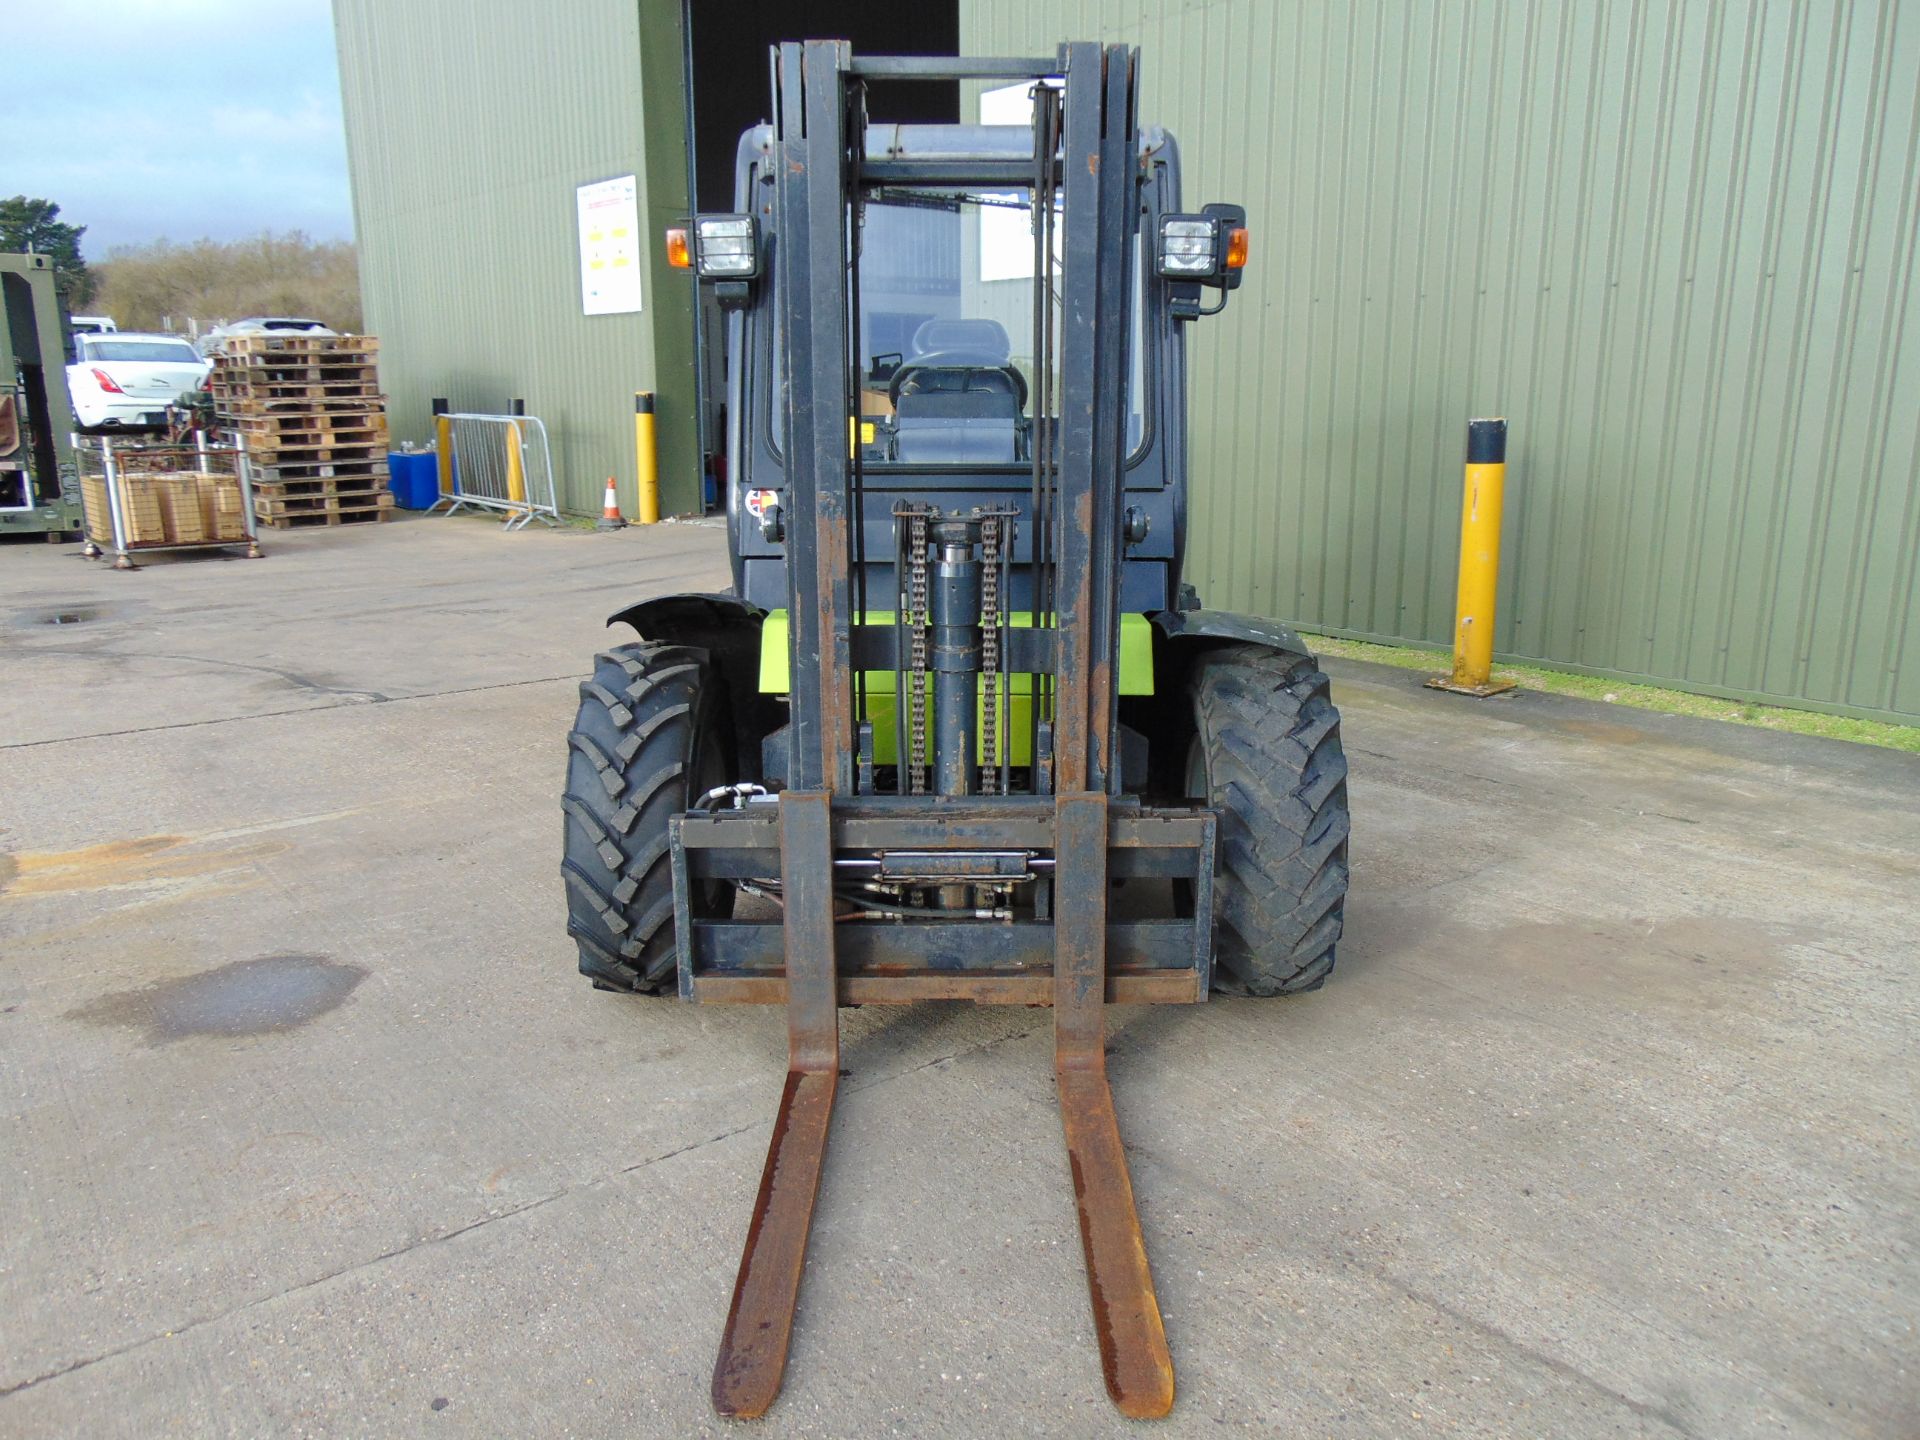 2011 Agrimac Agria TH210 4x4 Rough Terrain Diesel Forklift ONLY 1,918 HOURS!!! - Image 3 of 30